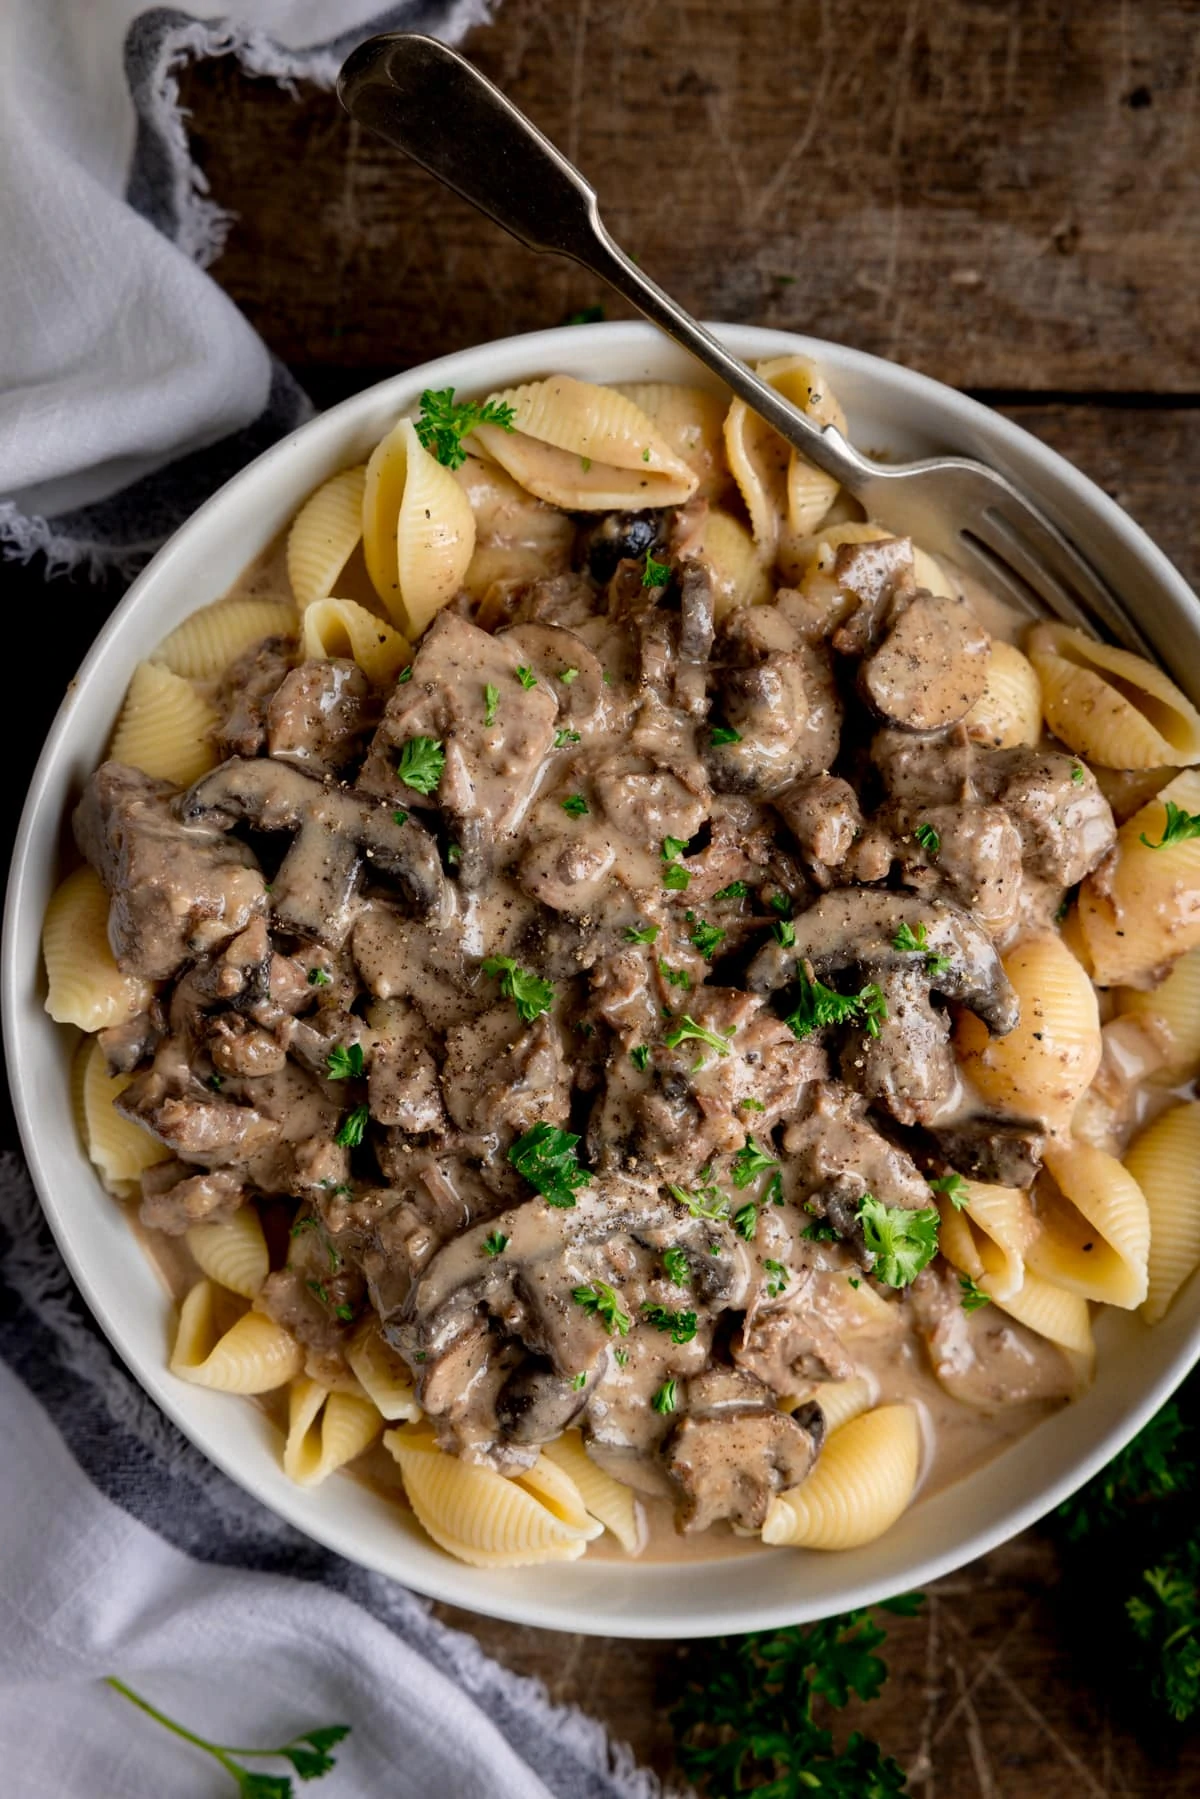 White bowl filled with slow cooker beef stroganoff served over pasta shells. Parsley is sprinkled on top. The bowl has a fork in it. The bowl is on a wooden table, next to a light napkin.